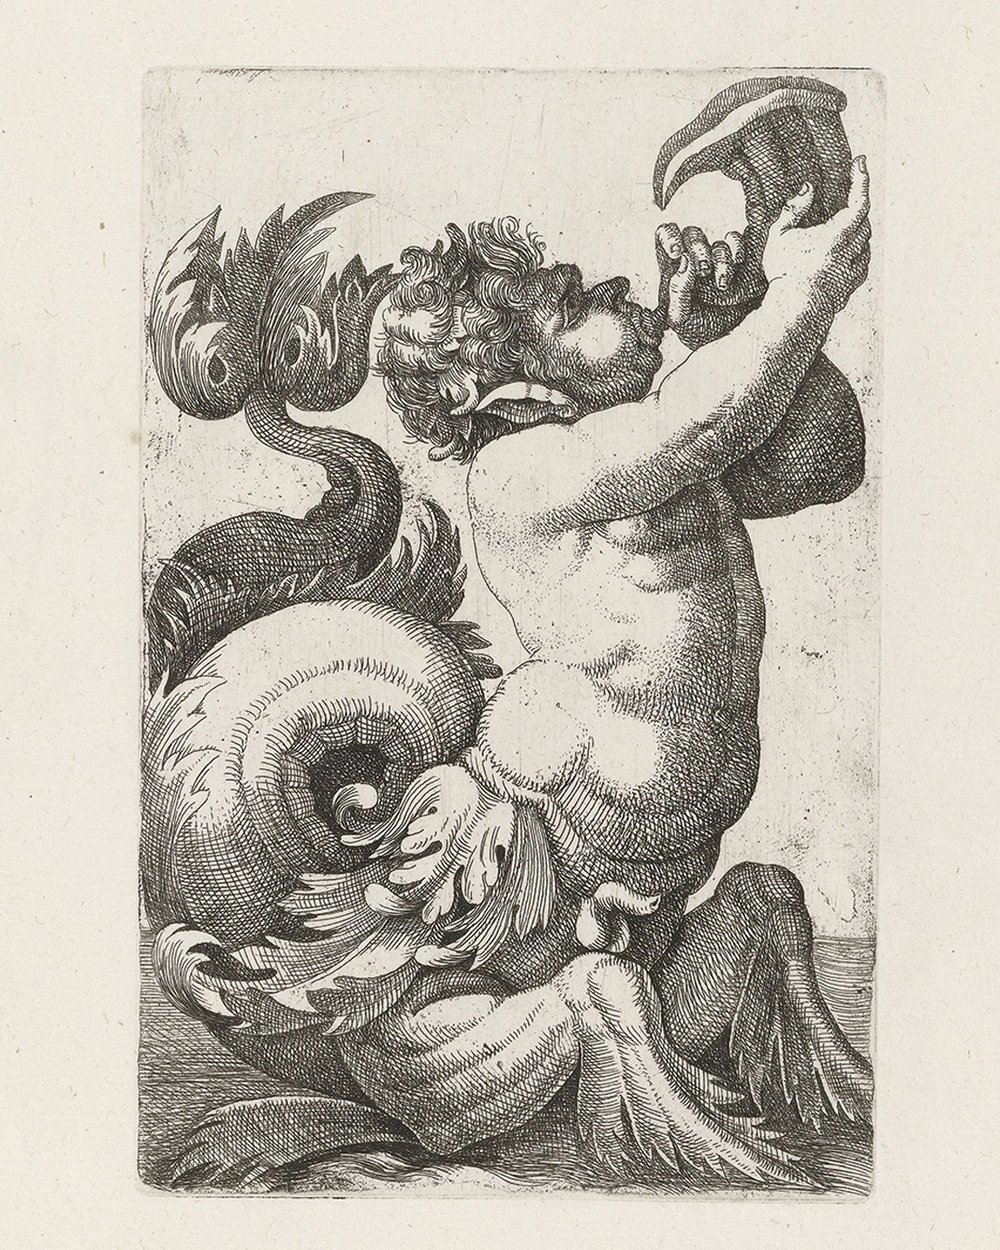 "Triton blowing on shell" (1580 - 1610)